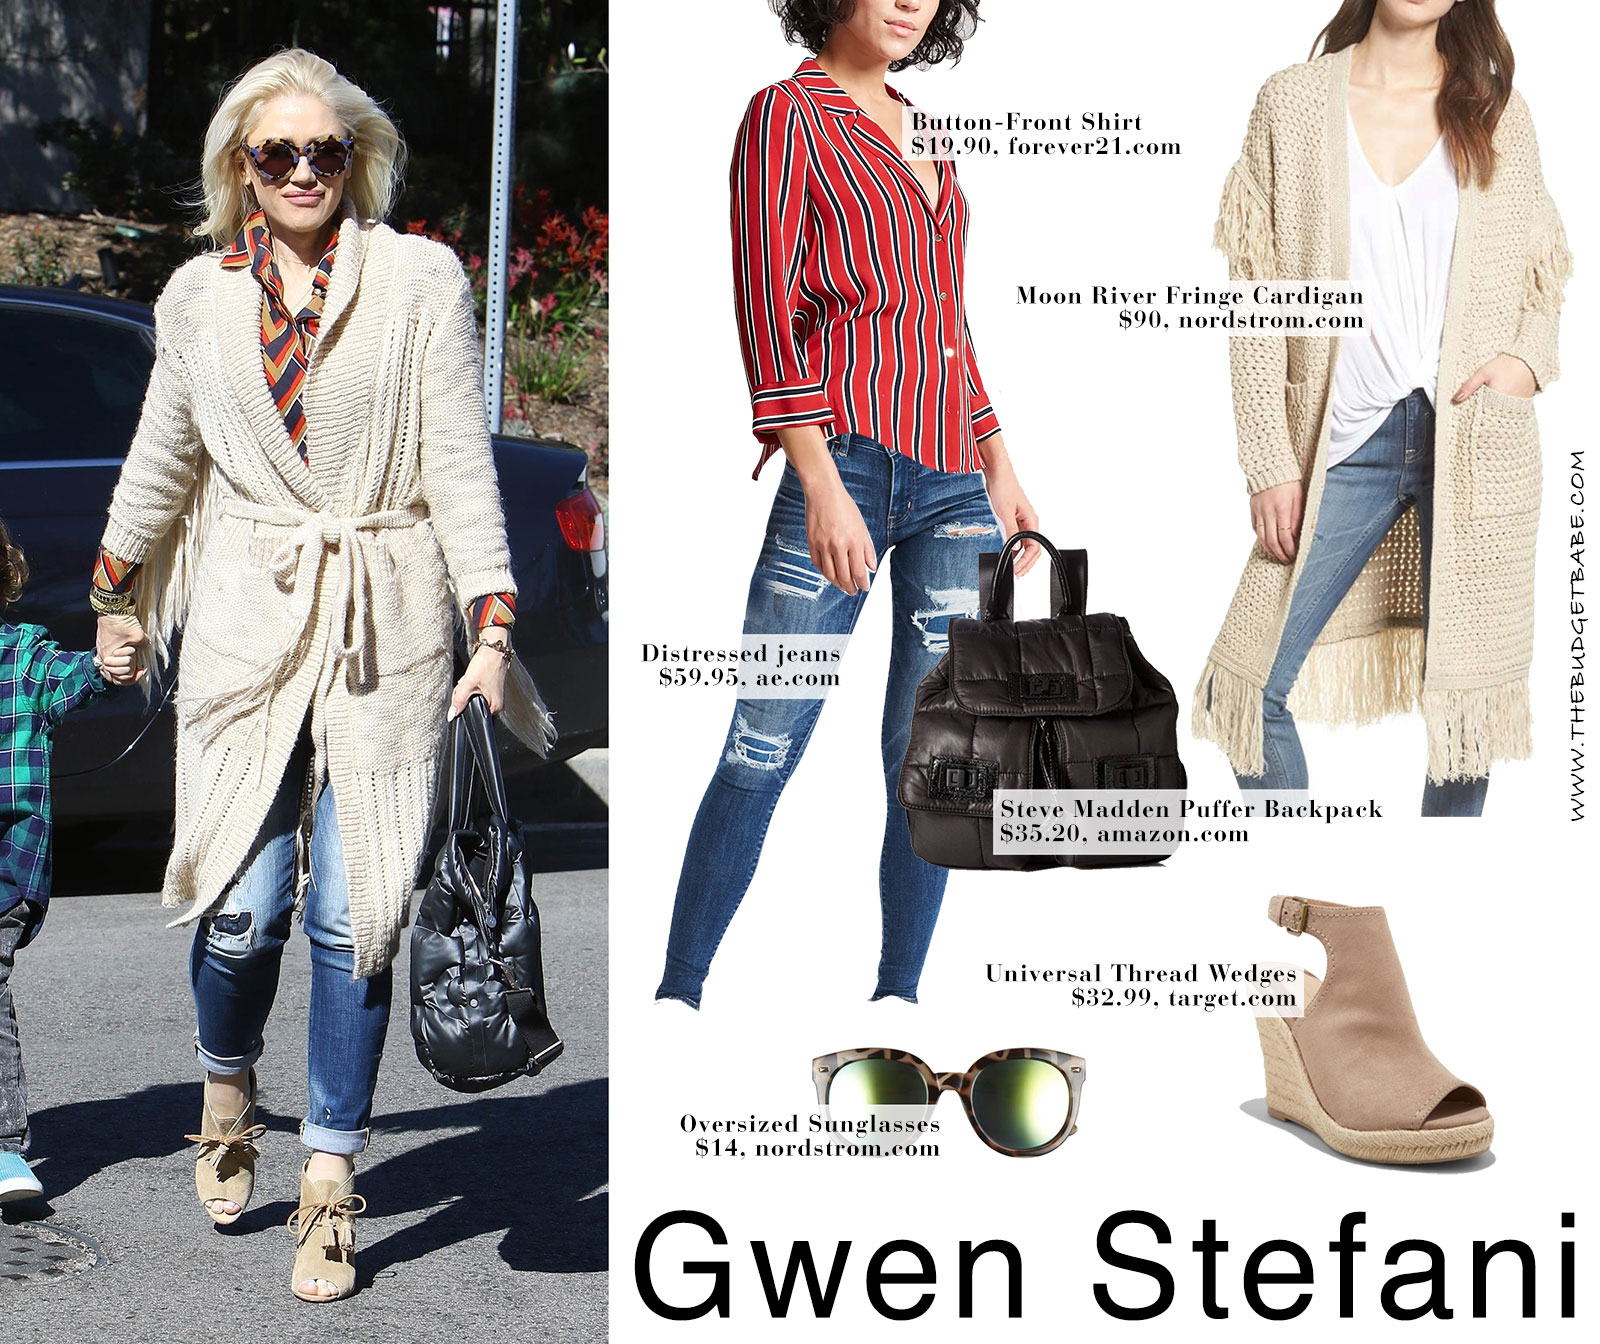 Gwen Stefani's fringe cardigan and wedge booties look for less